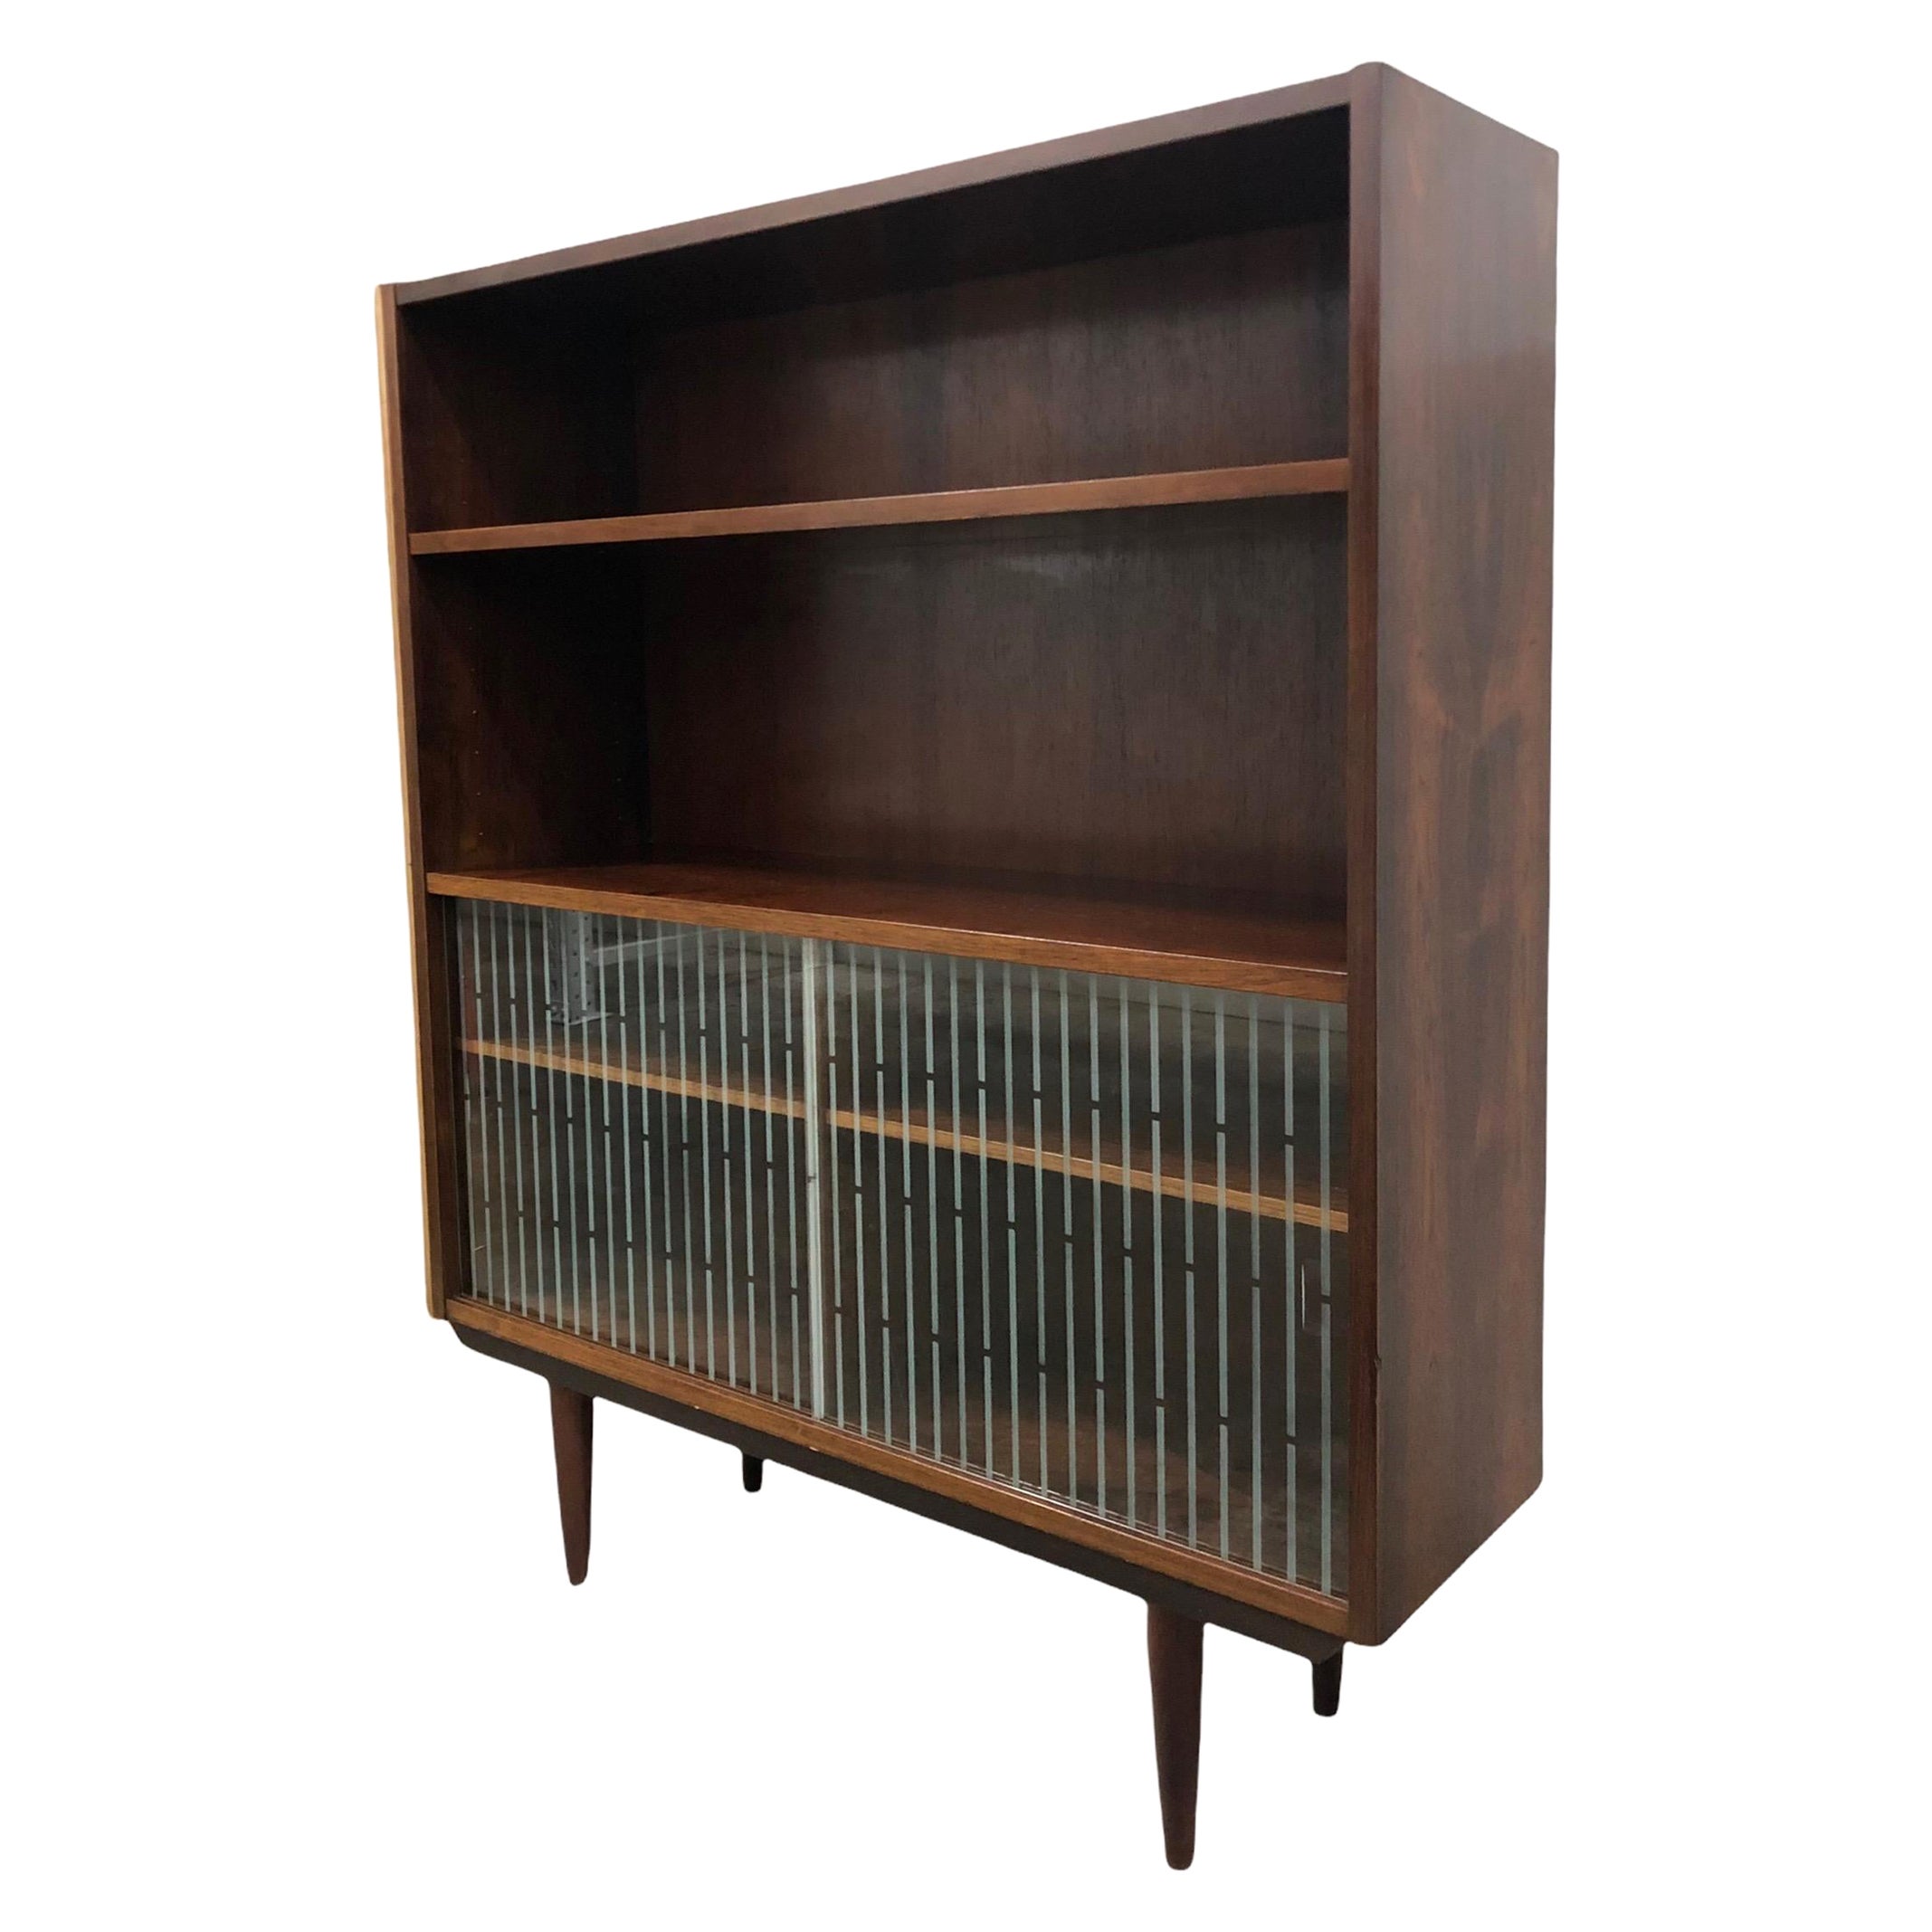 Vintage Danish Mid-Century Modern Rosewood Bookcase or Display Cabinet